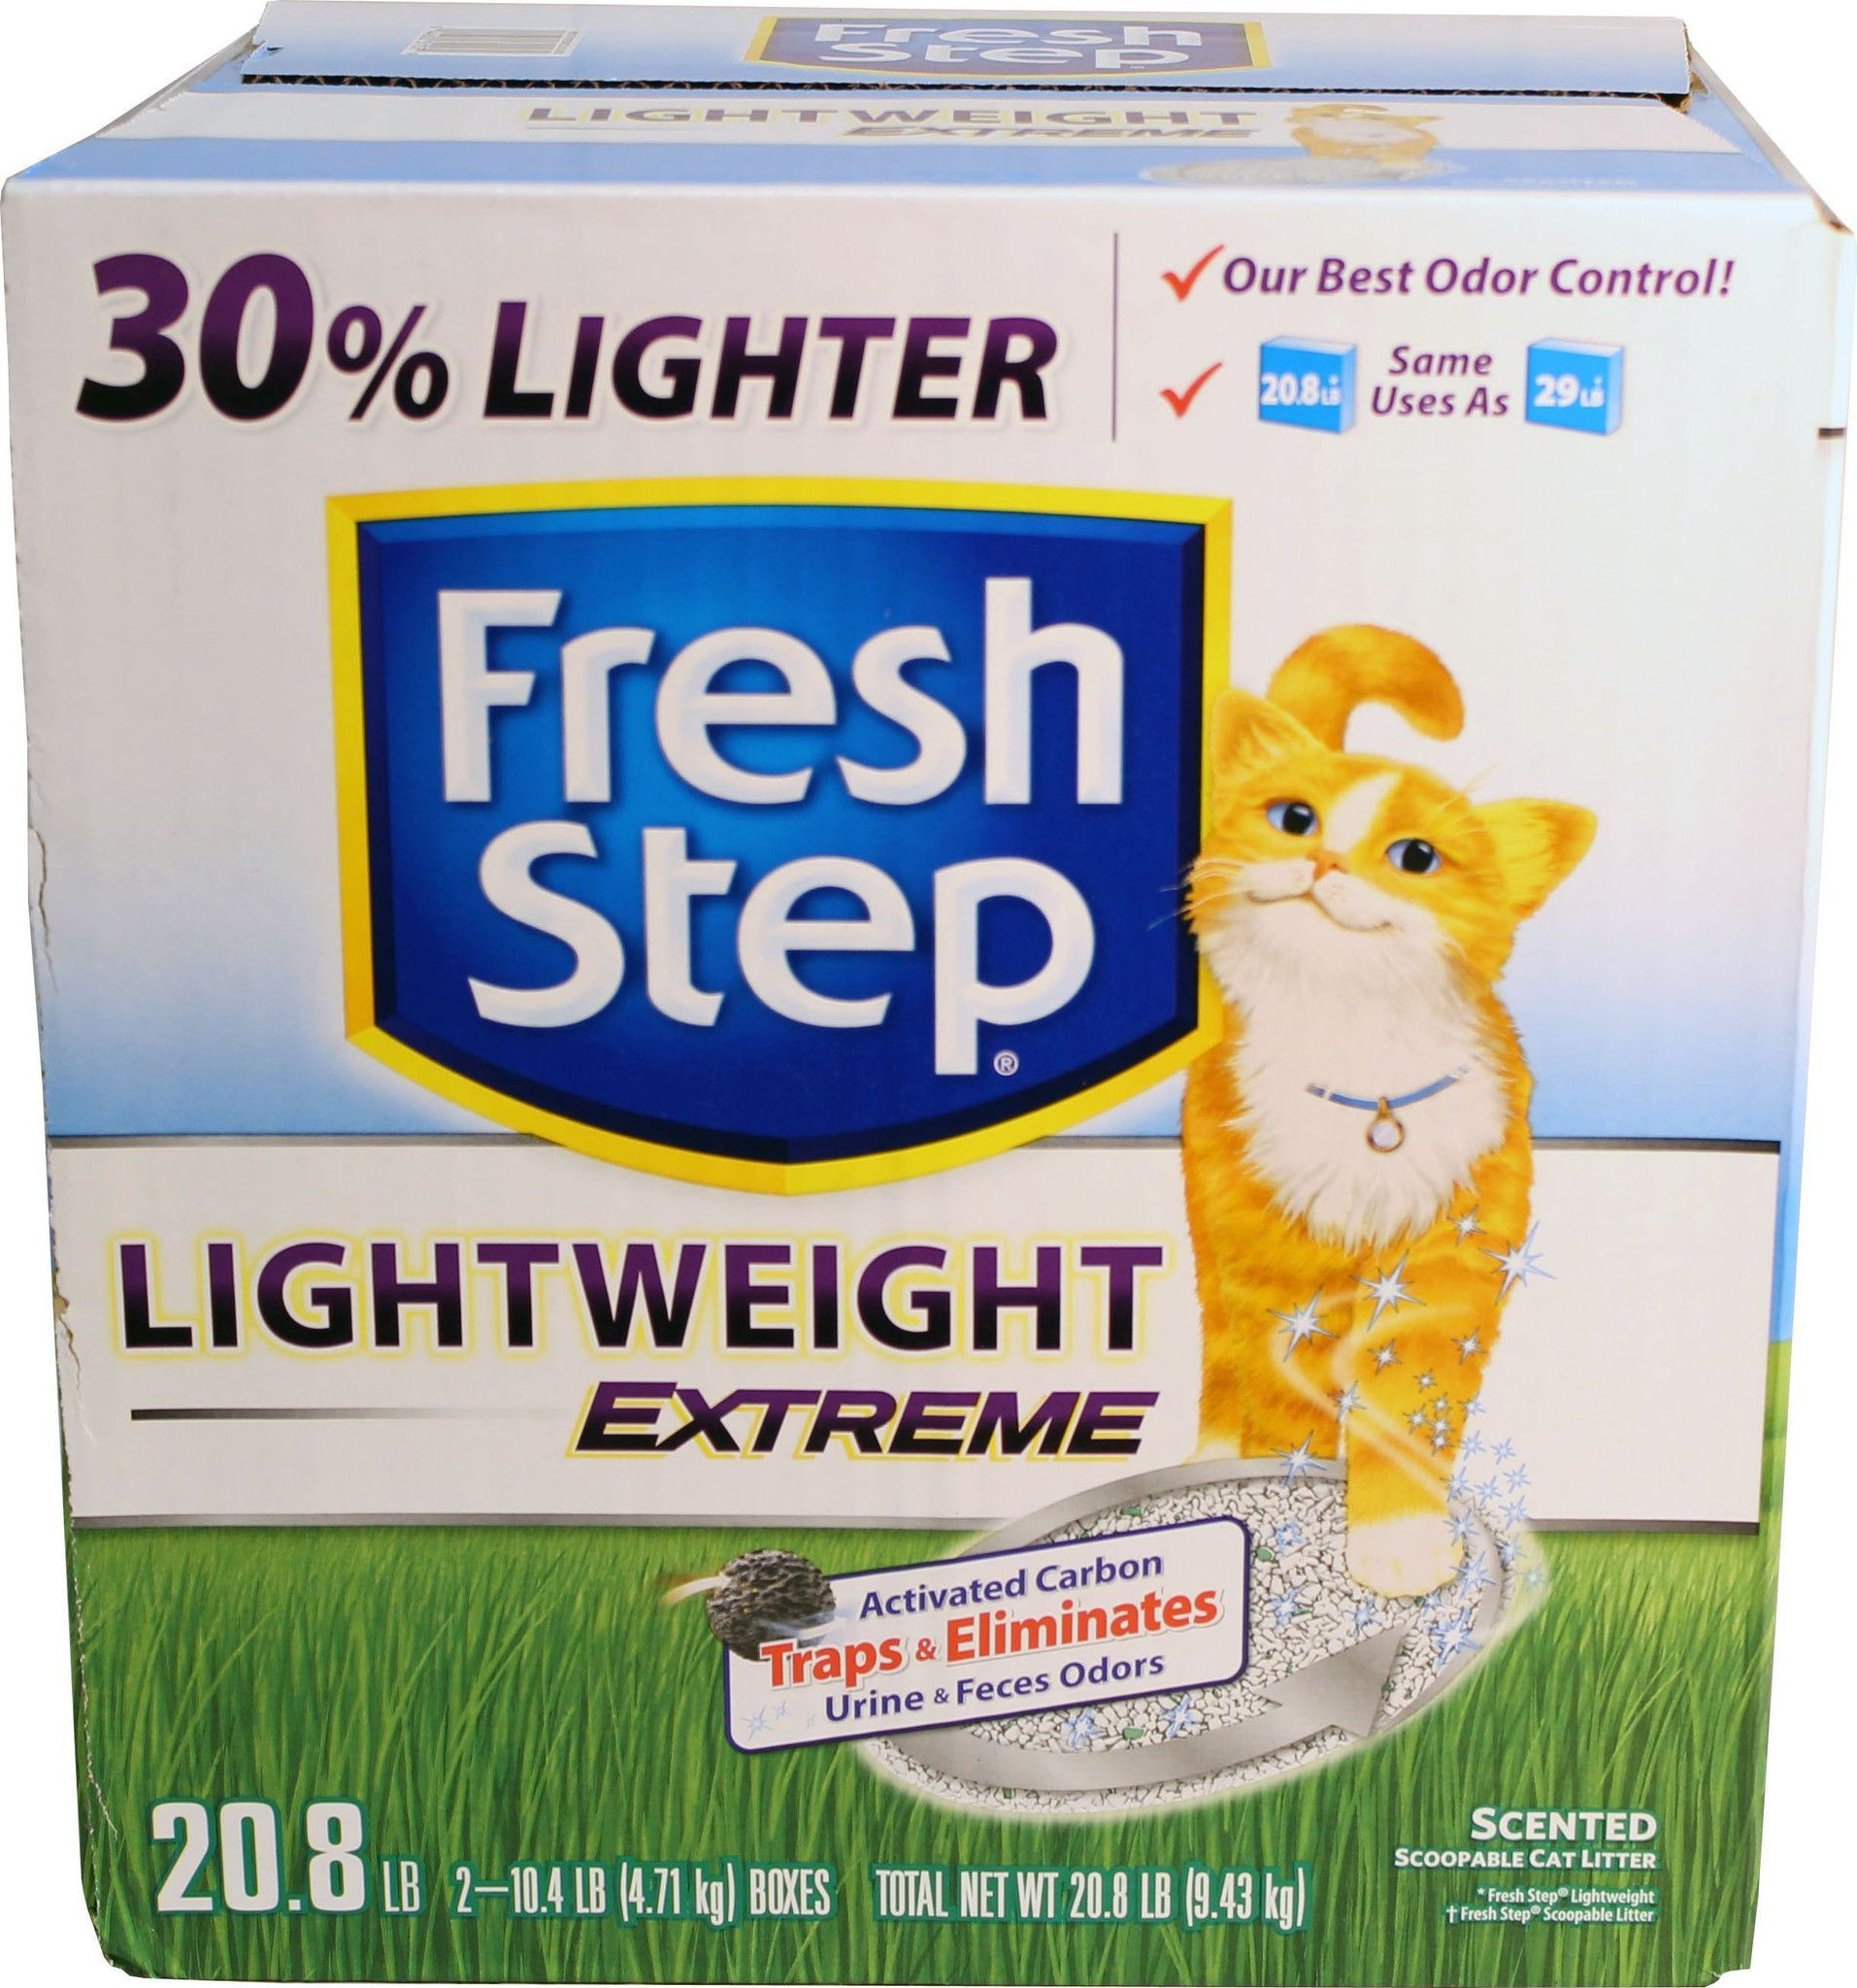 Fresh Step Lightweight Extreme Cat Litter | Products | Pinterest - Free Printable Scoop Away Coupons